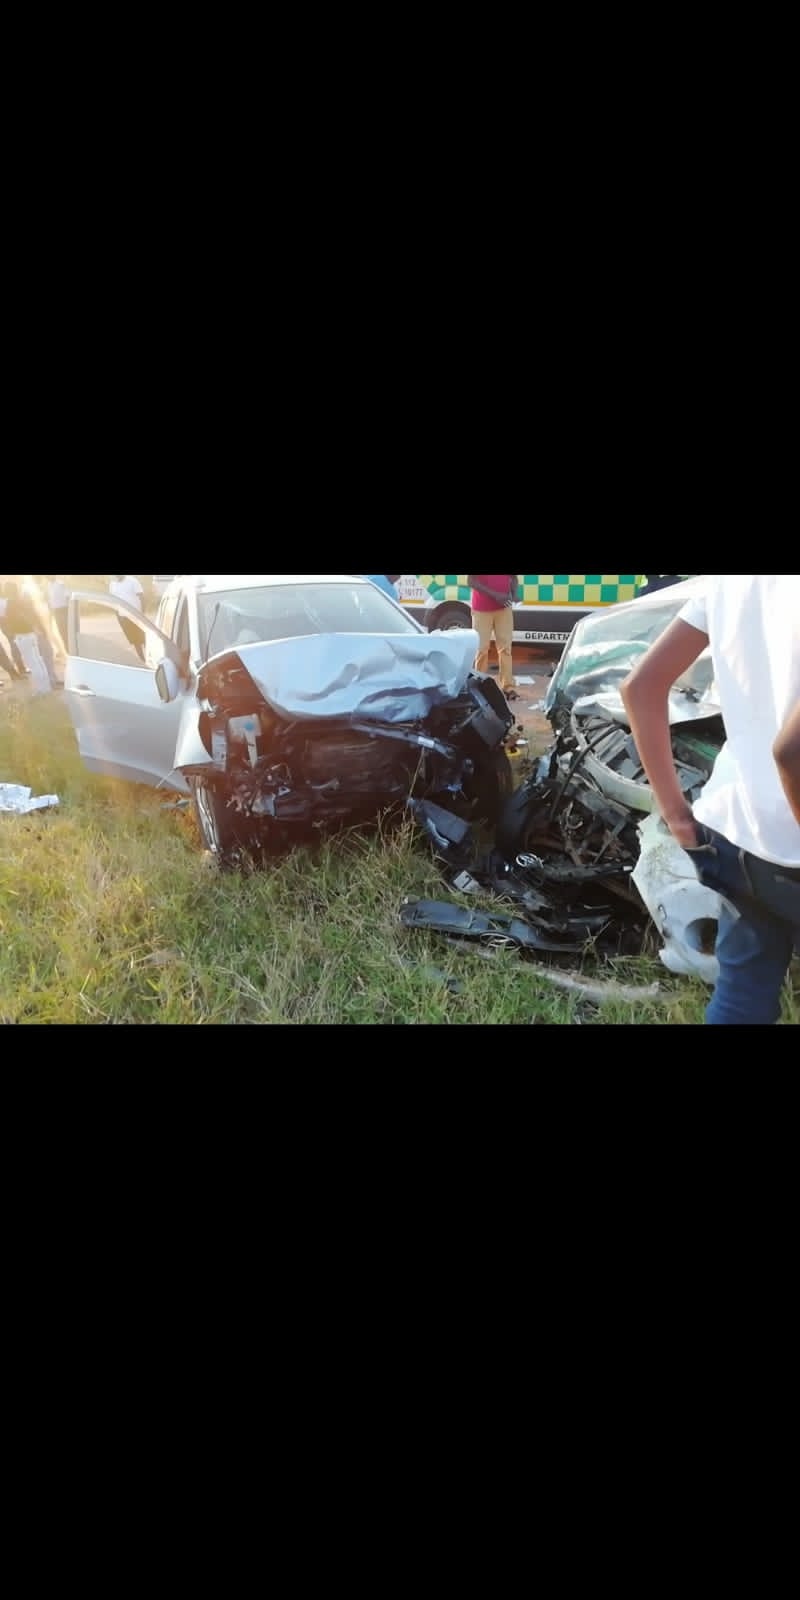 Gauteng off-duty cop rescues victims of head-on-collision in Giyani